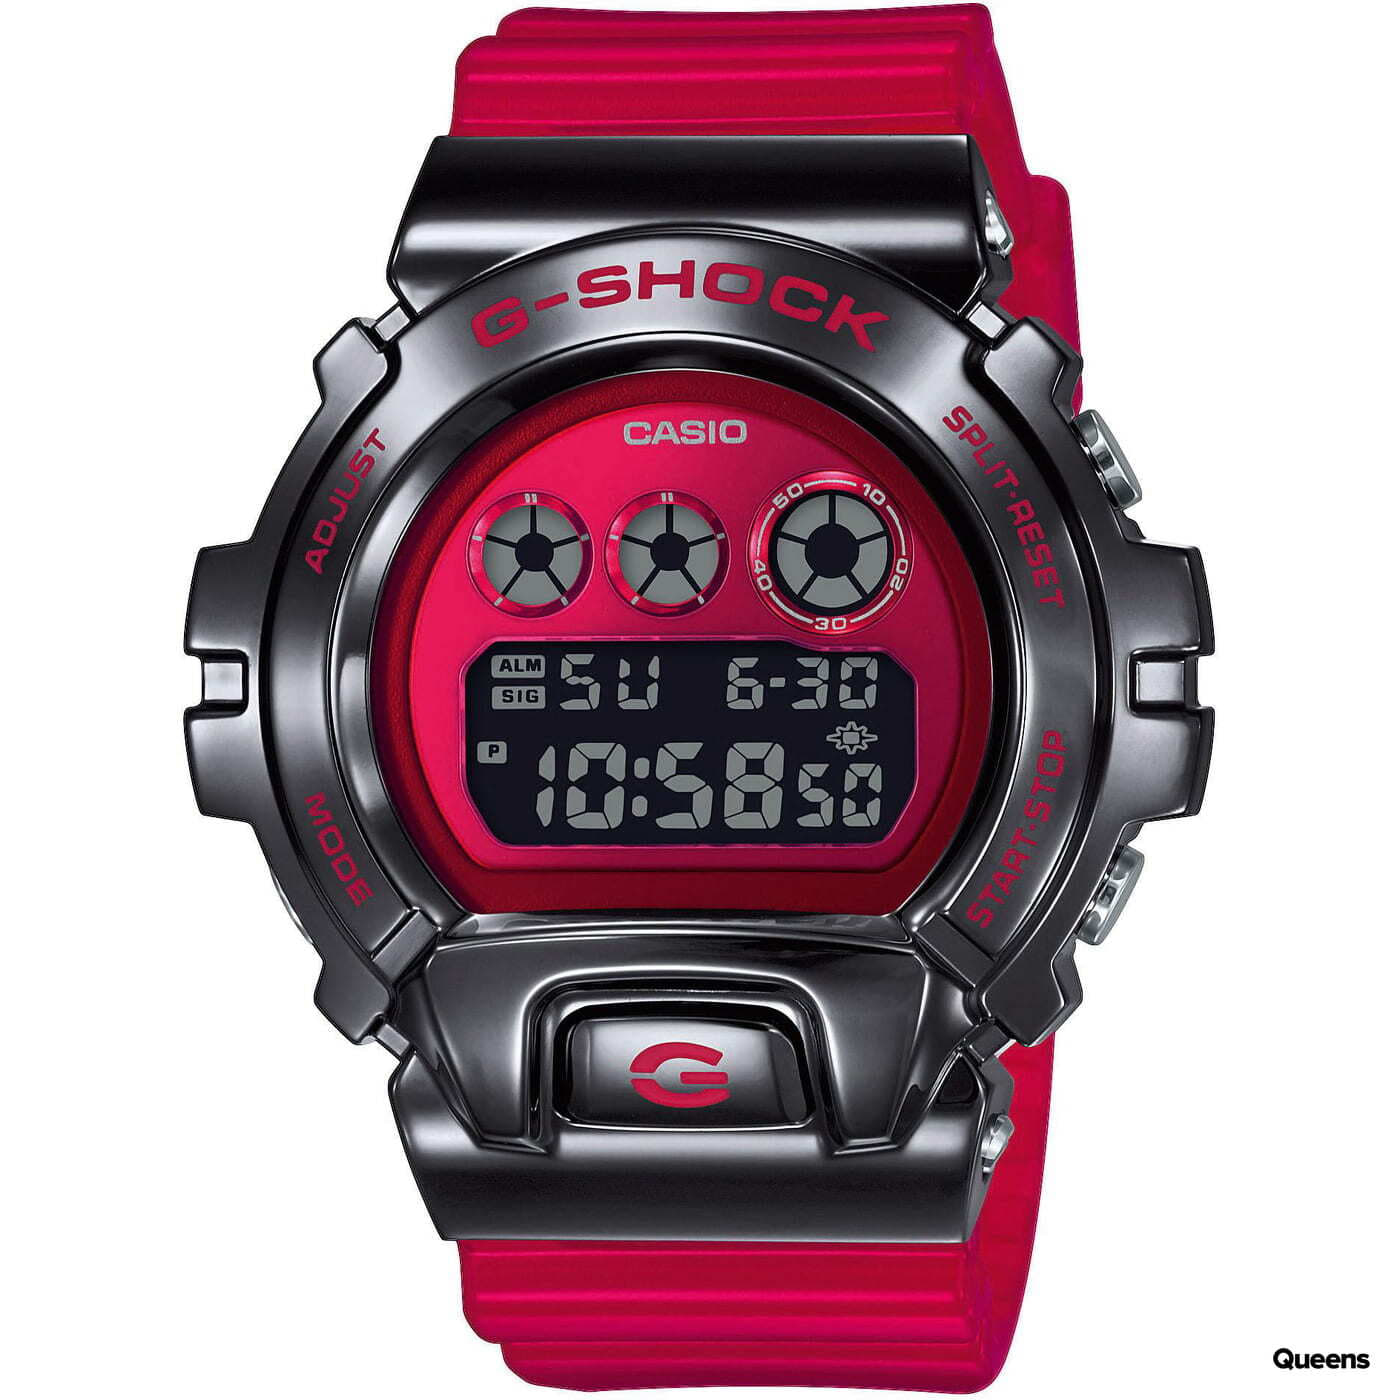 Watches Casio G-Shock GM 6900B-4ER Metal Covered Red/ Black